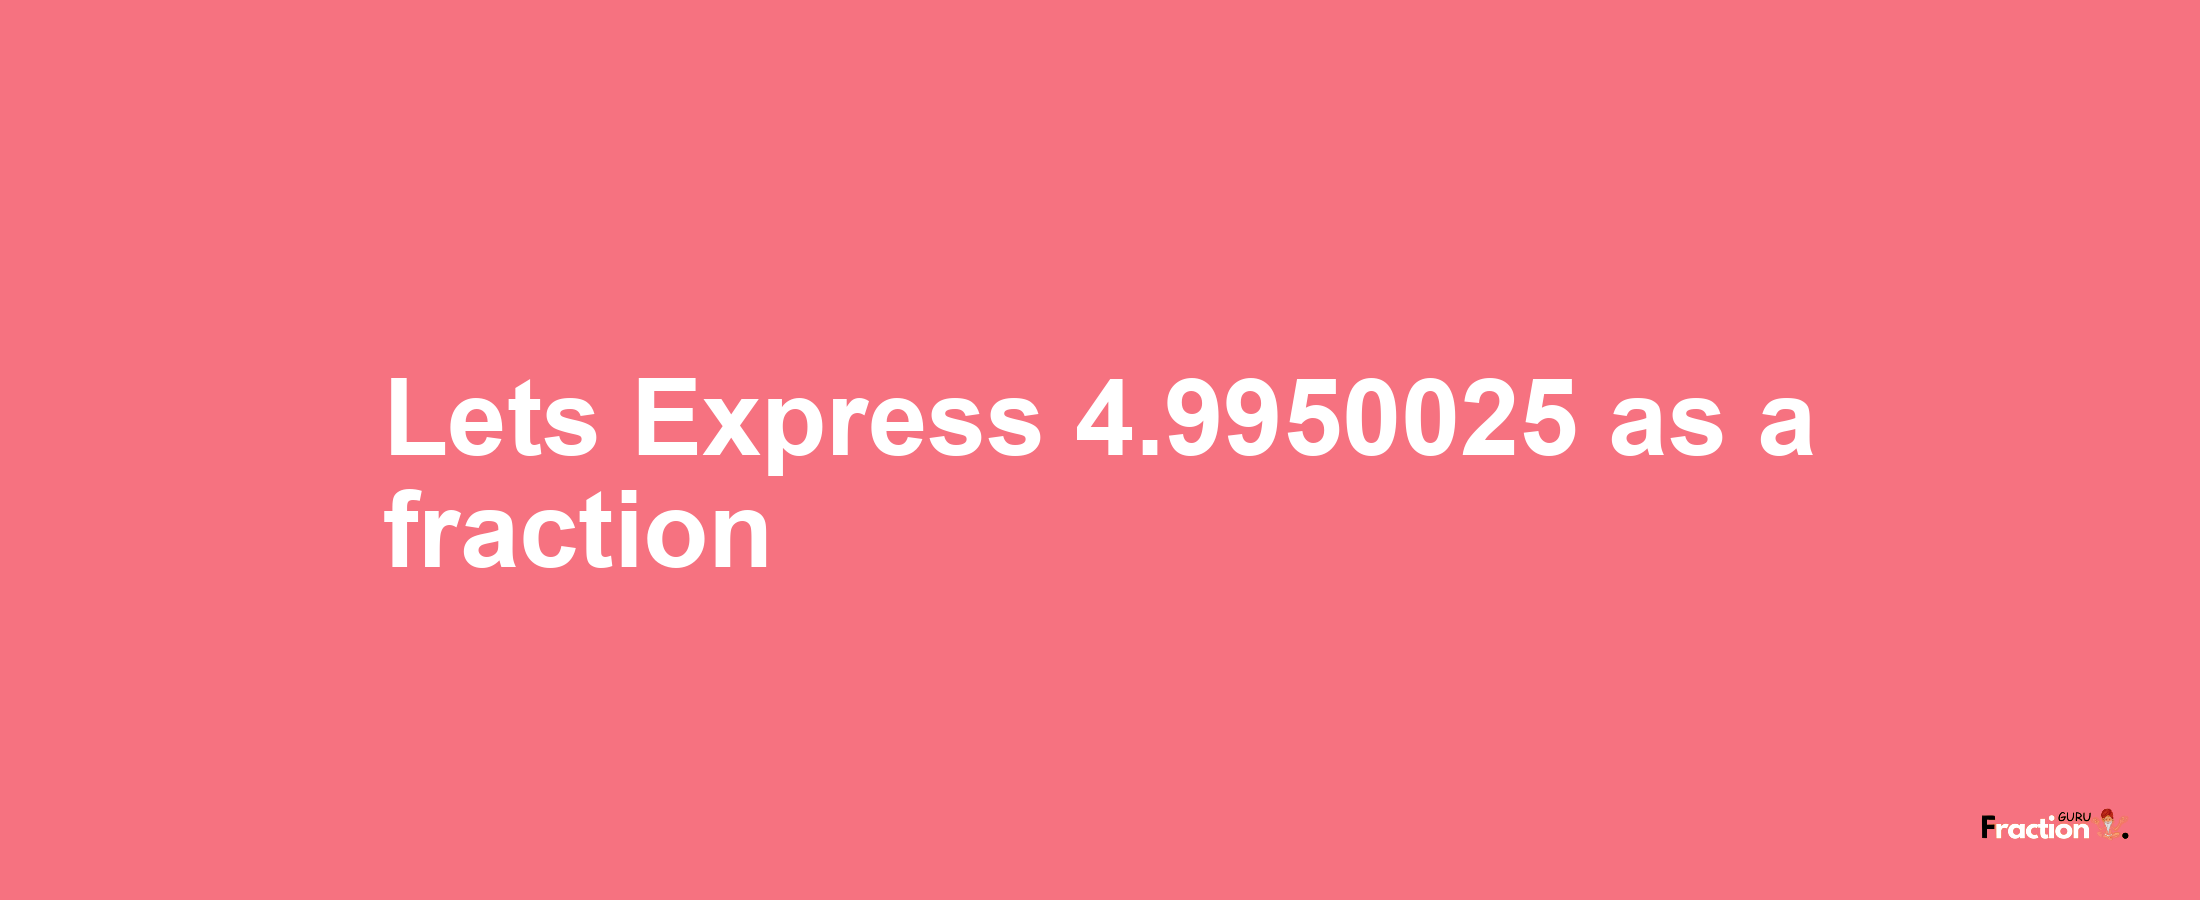 Lets Express 4.9950025 as afraction